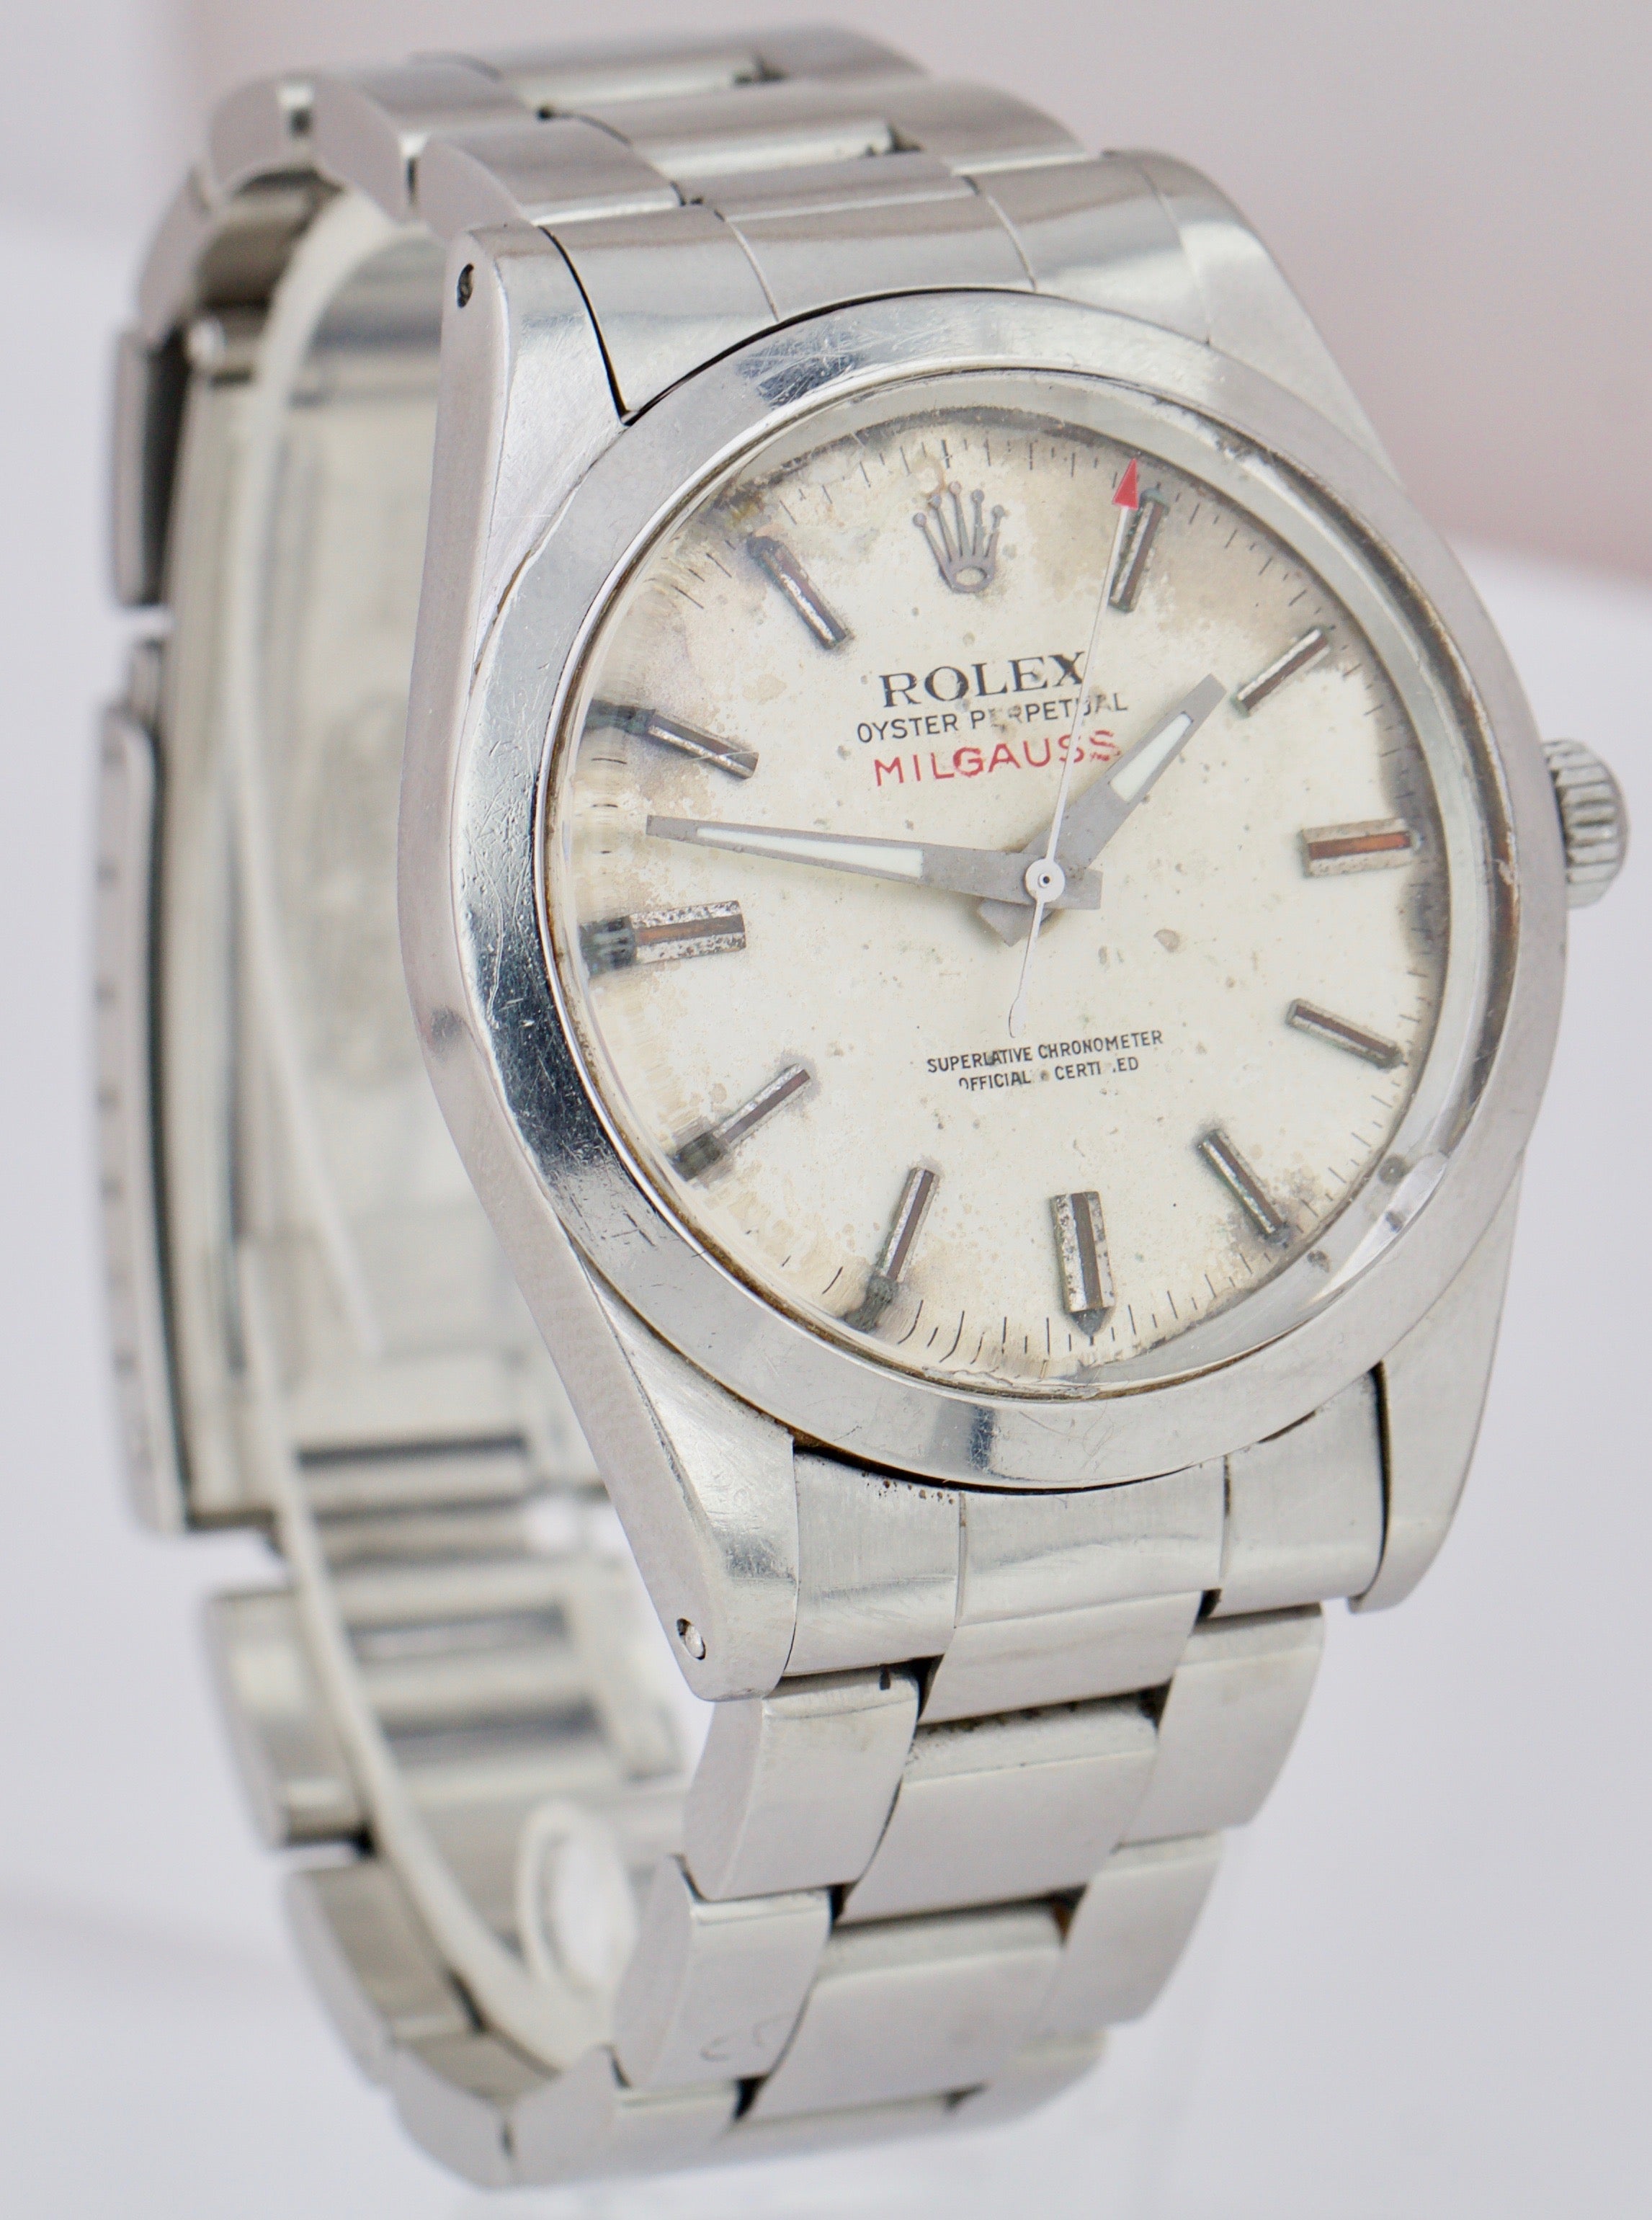 Vintage Rolex Milgauss Silver Dial 1019 38mm Stainless Steel Oyster Watch